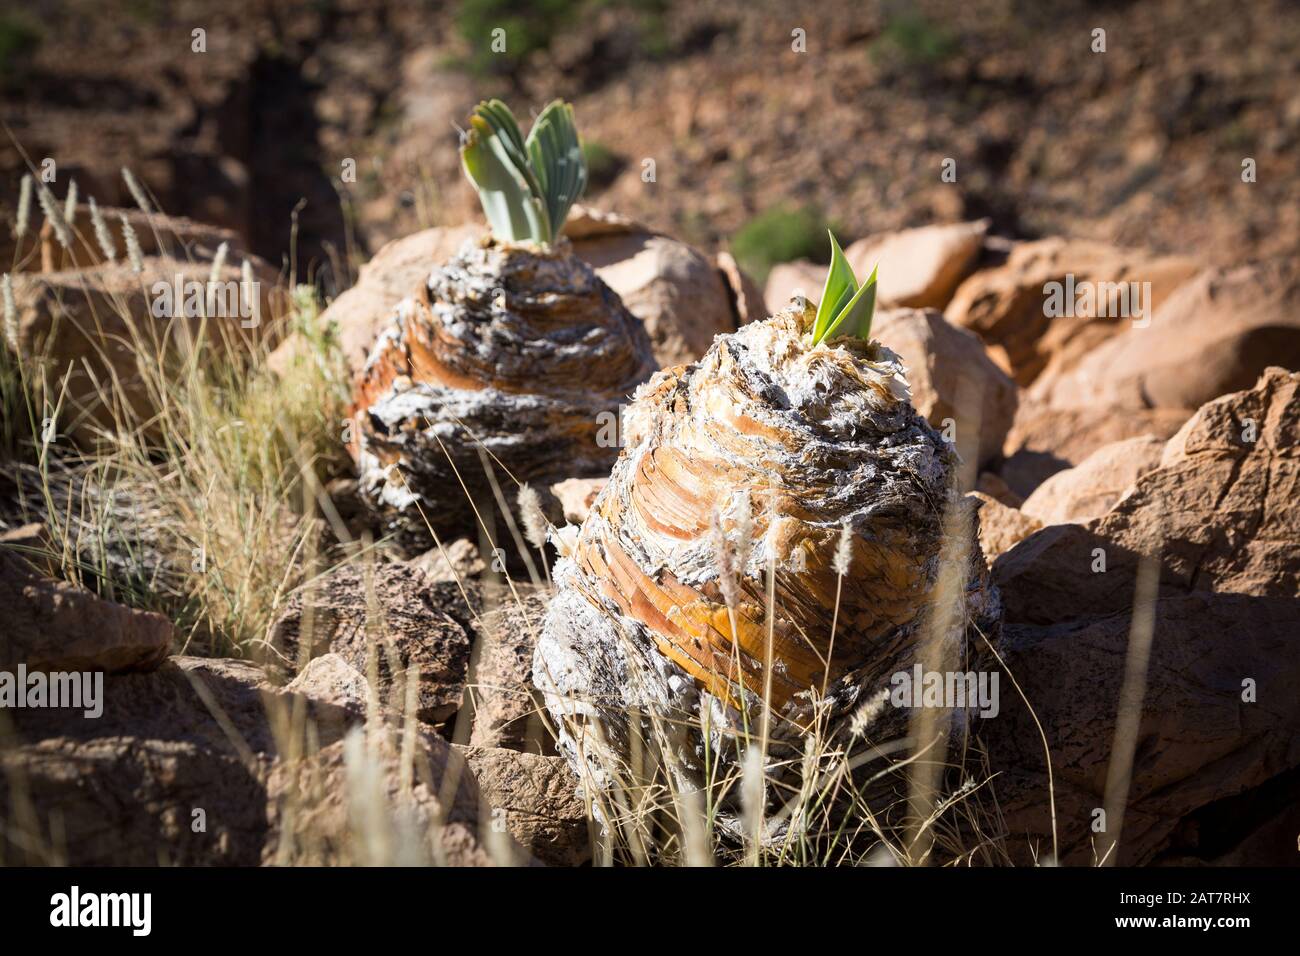 New life growing in the desert of Namib Naukluft Park (focus on the plant), Namibia Stock Photo